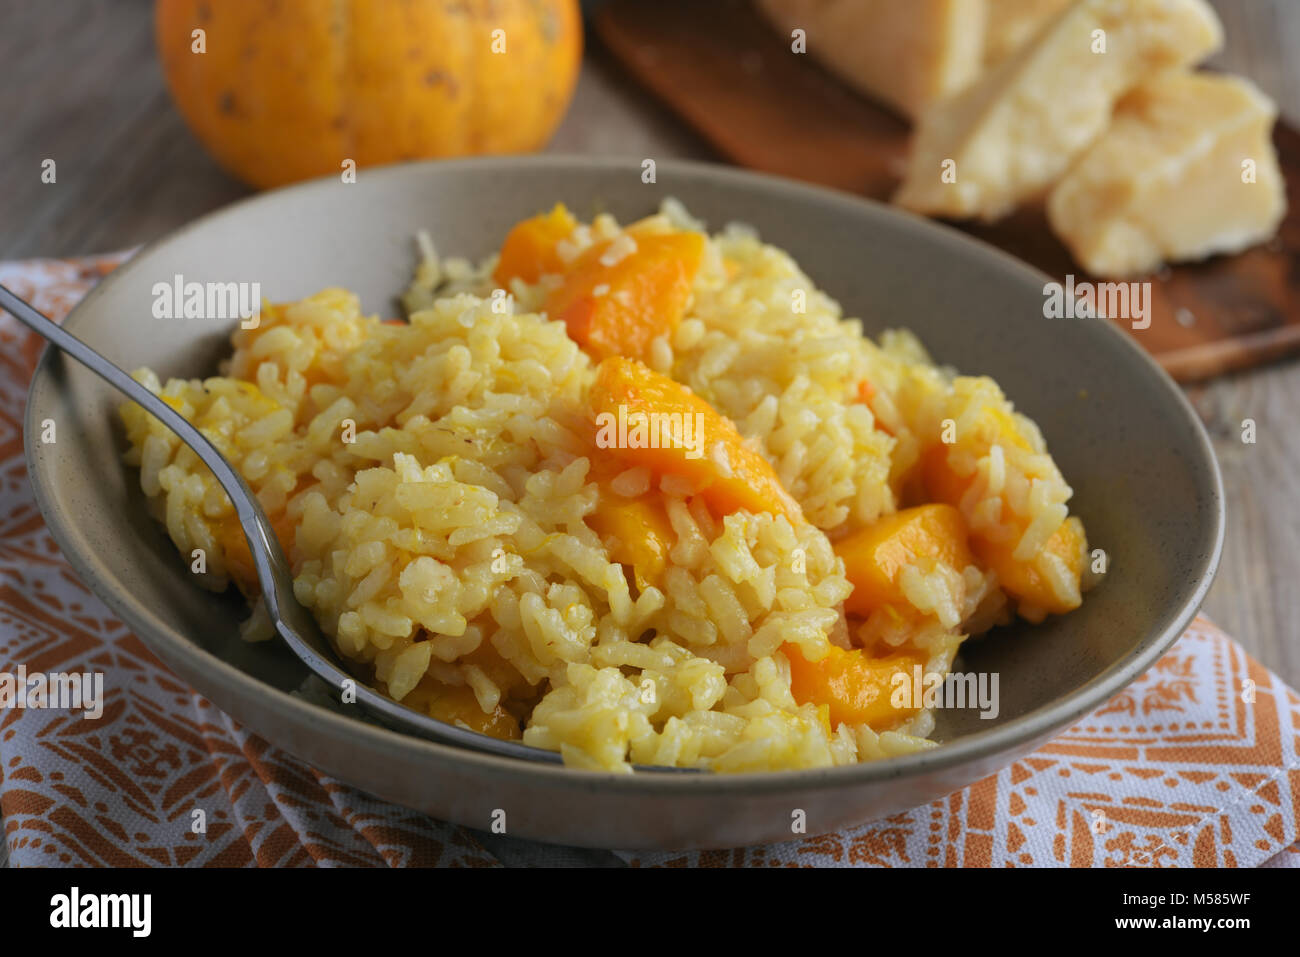 Pumpkin risotto on a rustic table Stock Photo